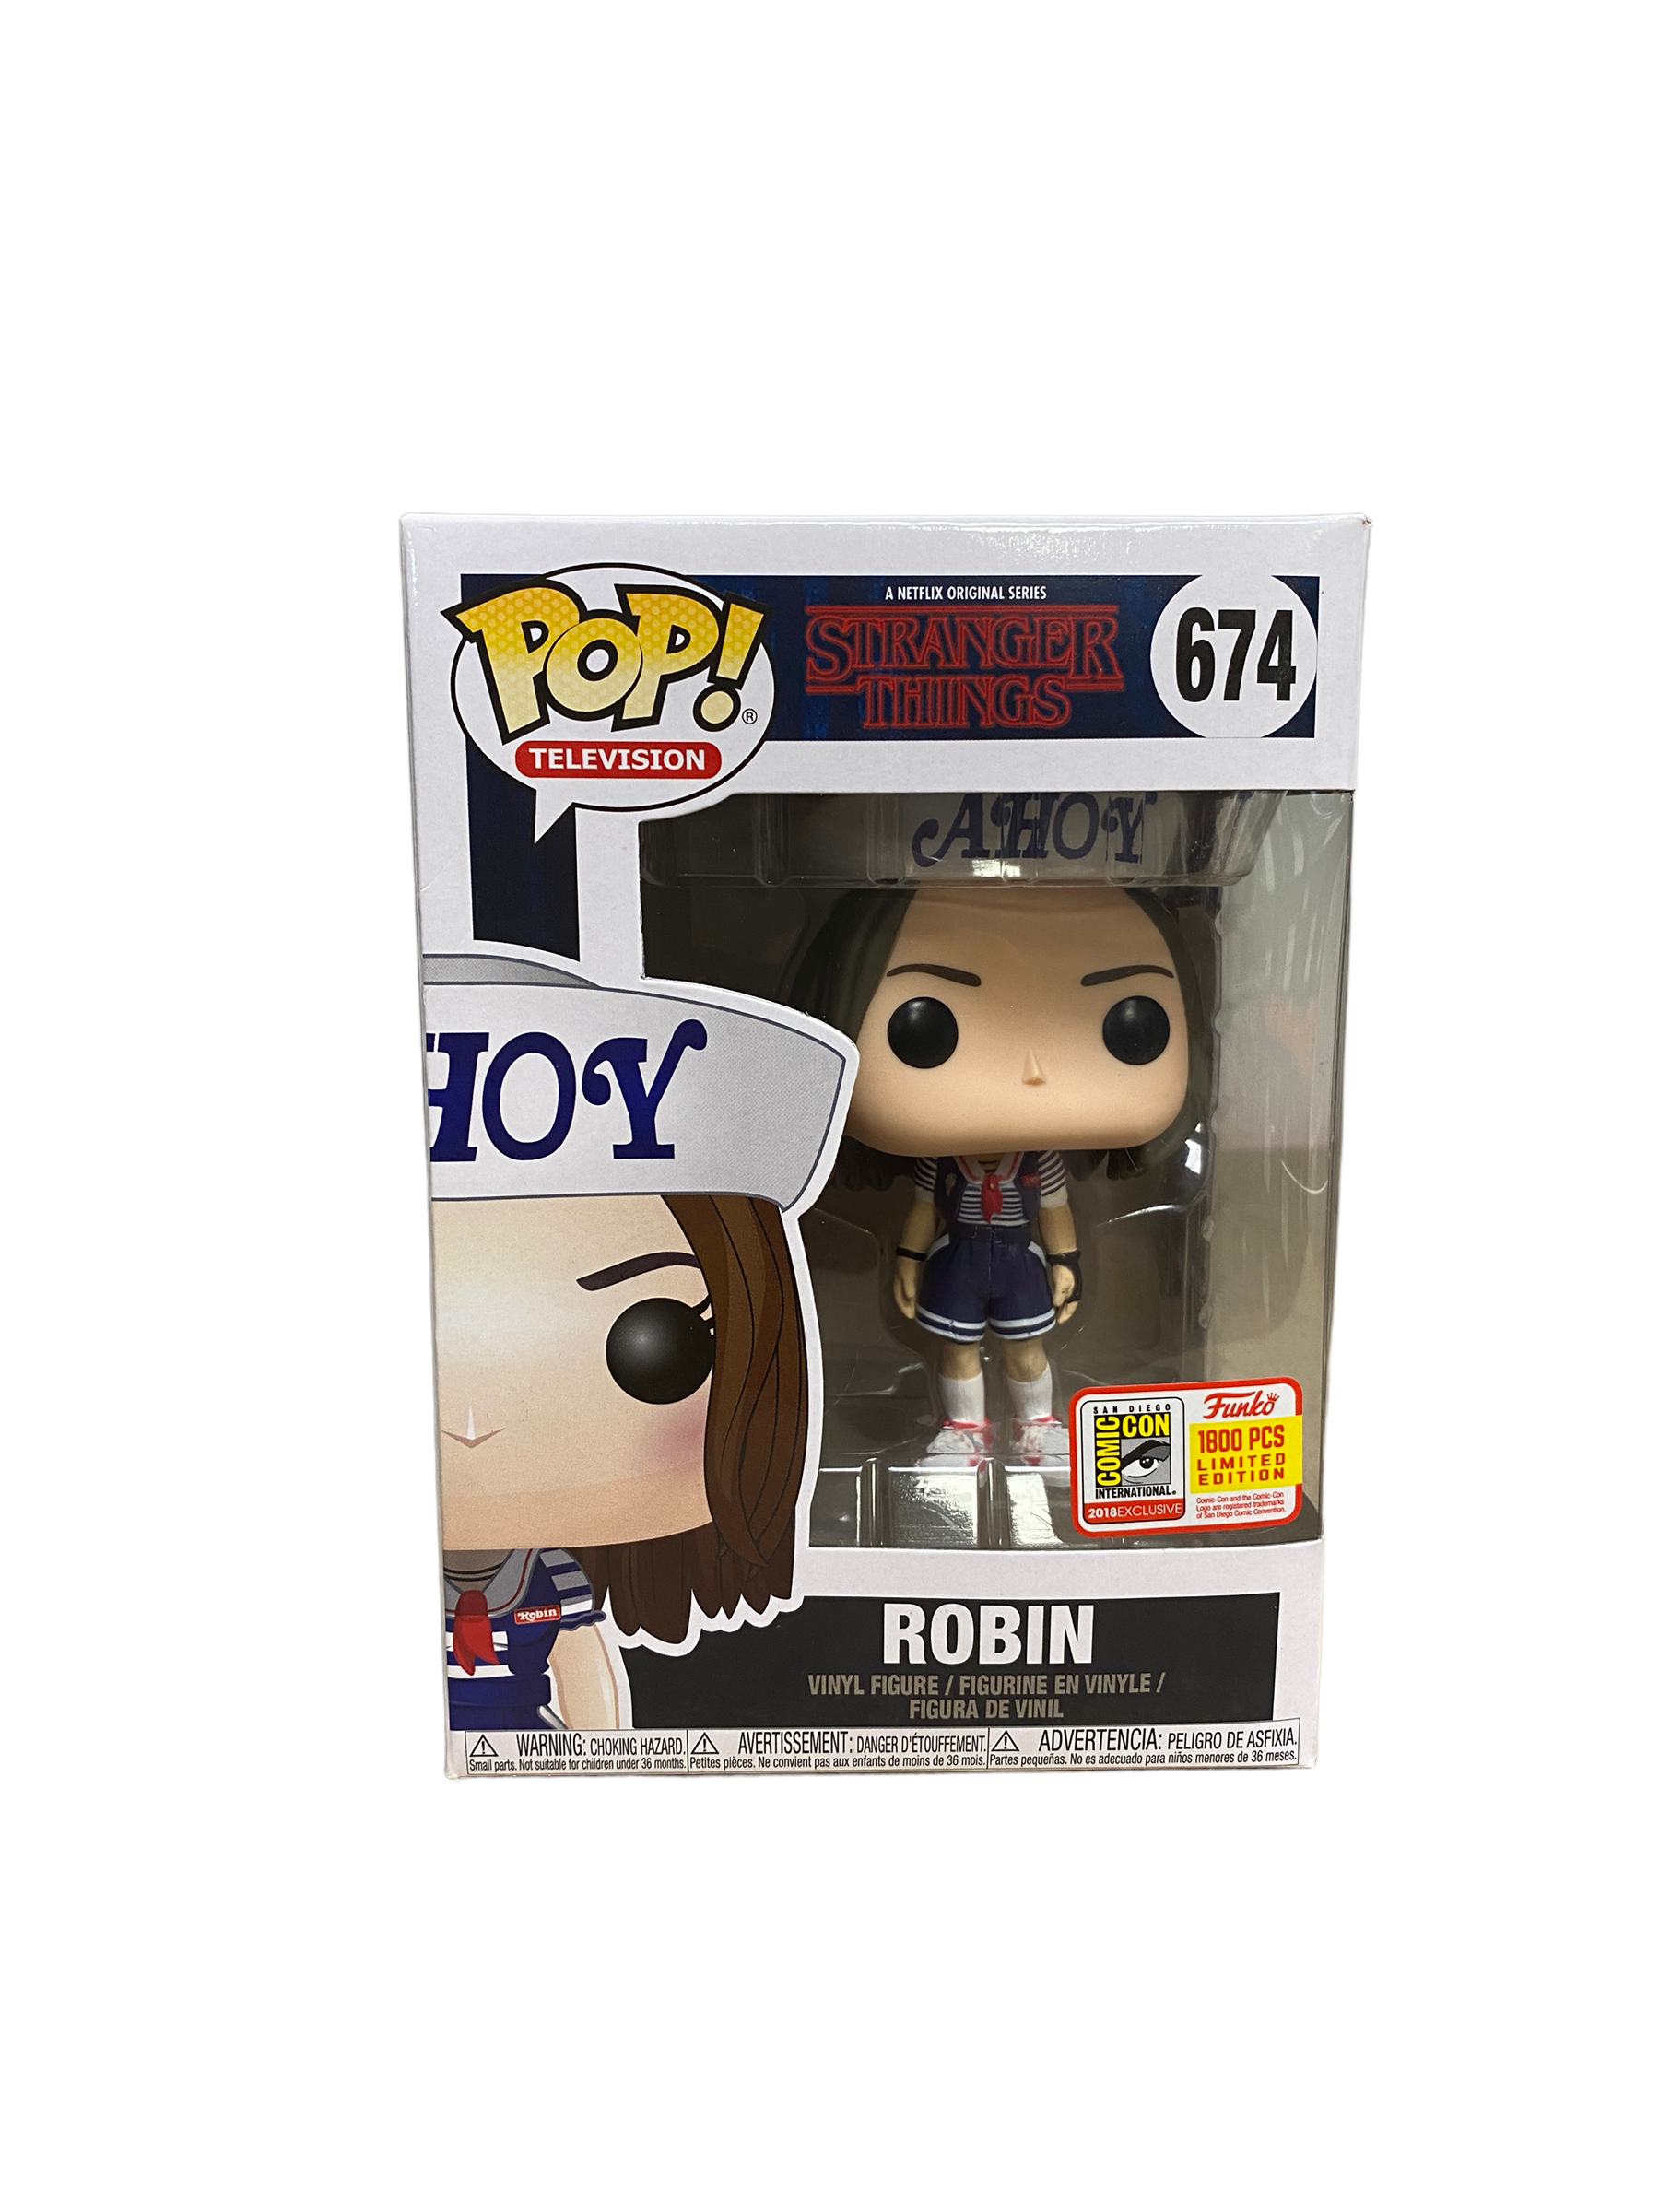 Robin #674 Funko Pop! - Stranger Things - SDCC 2018 Exclusive LE1800 Pcs - Condition 8.5/10